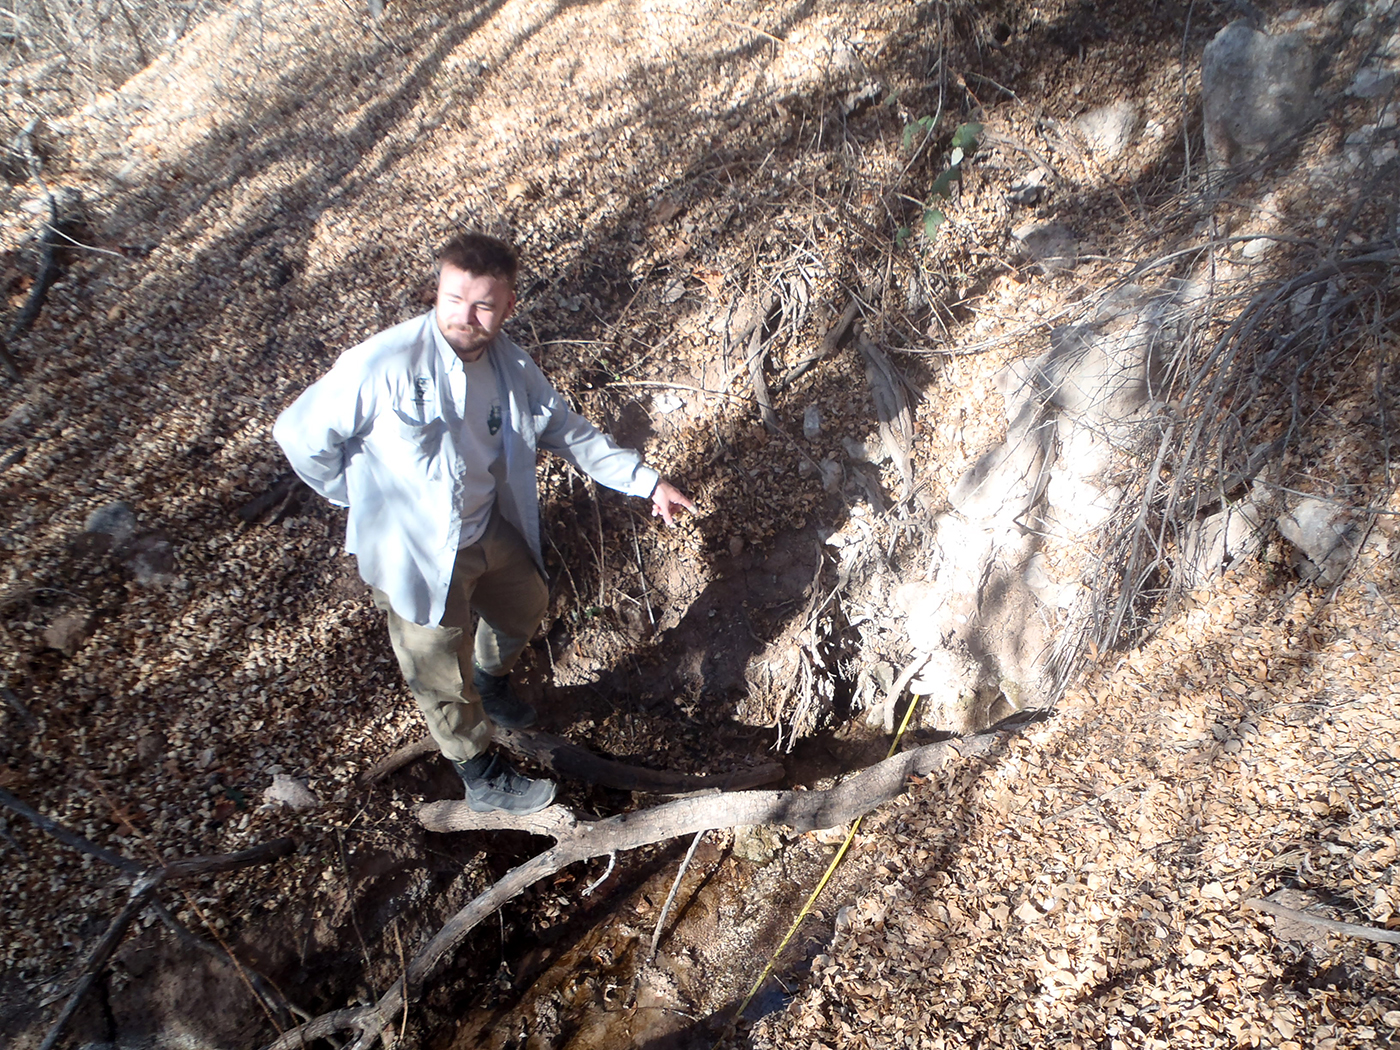 Man points down at water flowing from the base of a rock outcrop.